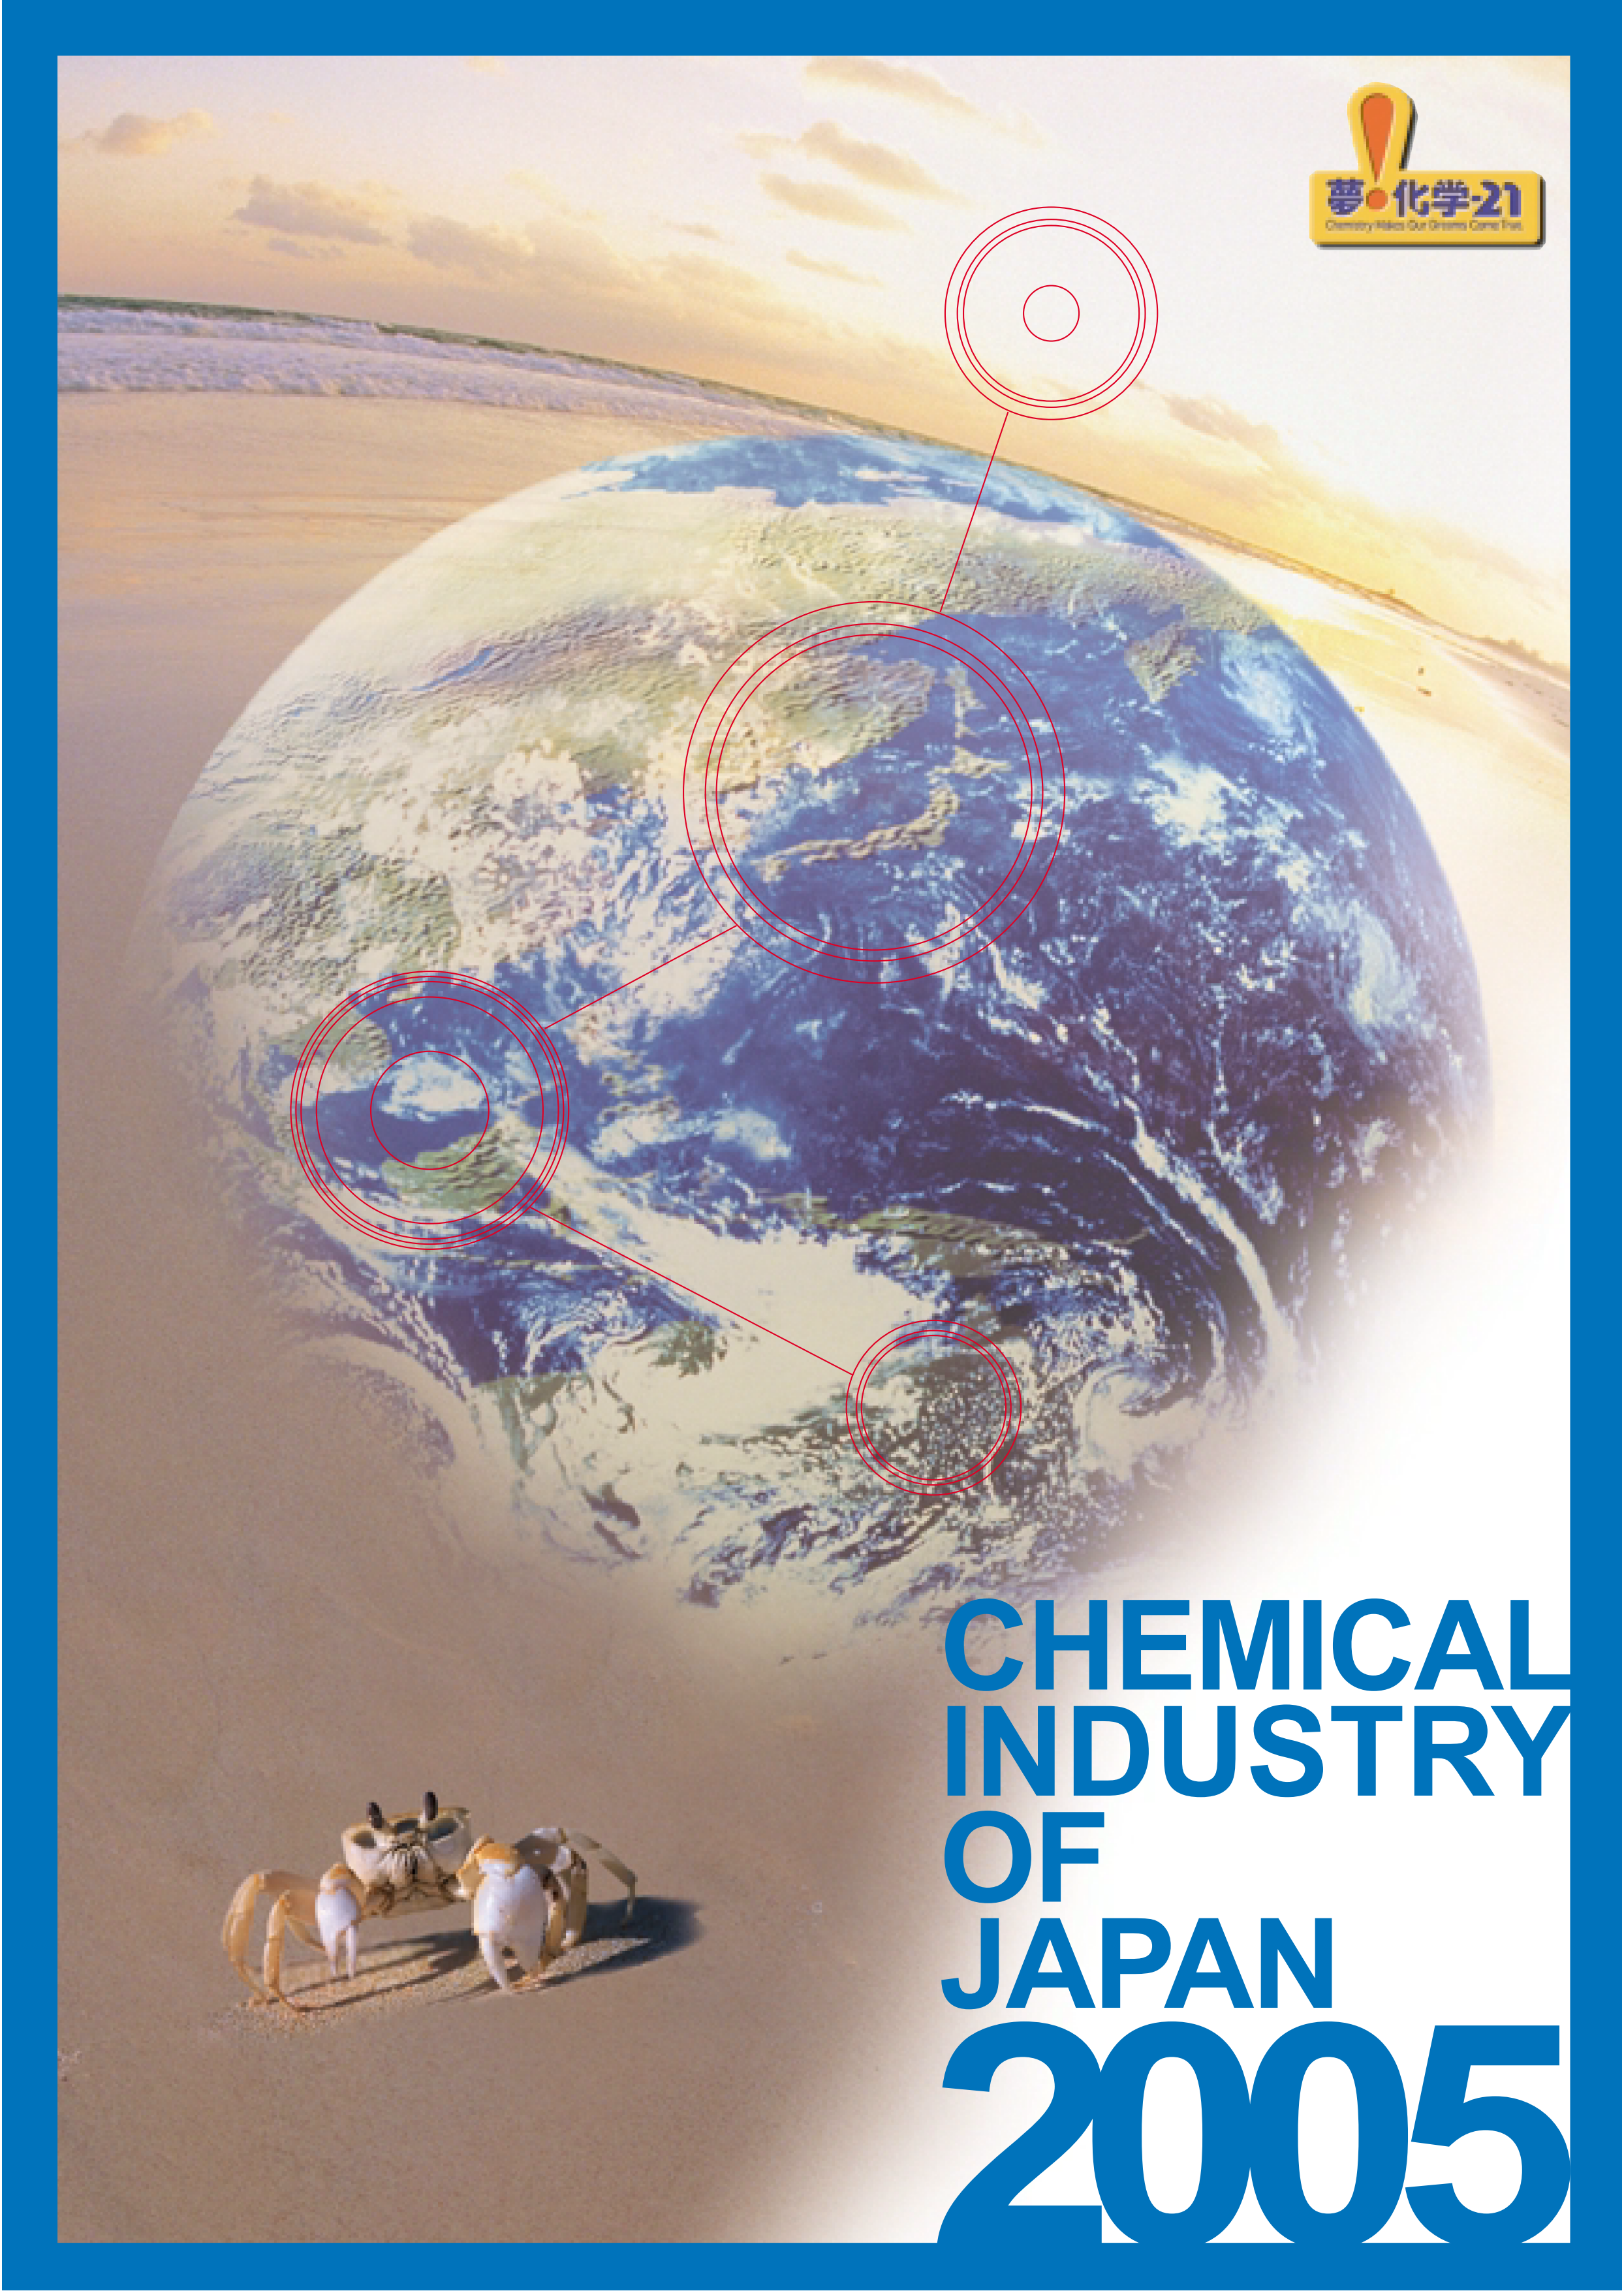 2005 CHEMICAL INDUSTRY OF JAPAN IN GRAPHS